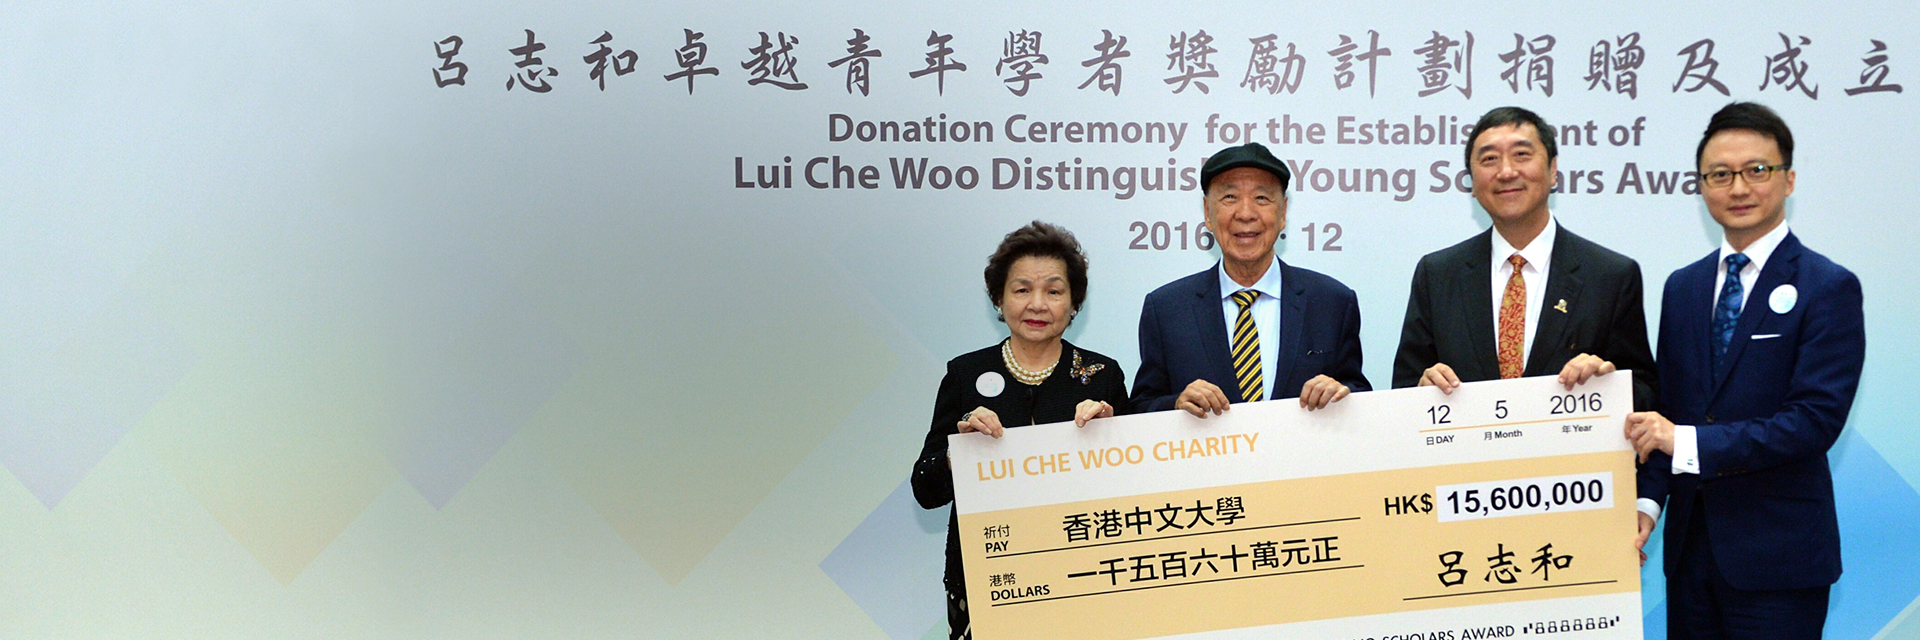 About Chairman and Founder Dr Lui Che-woo